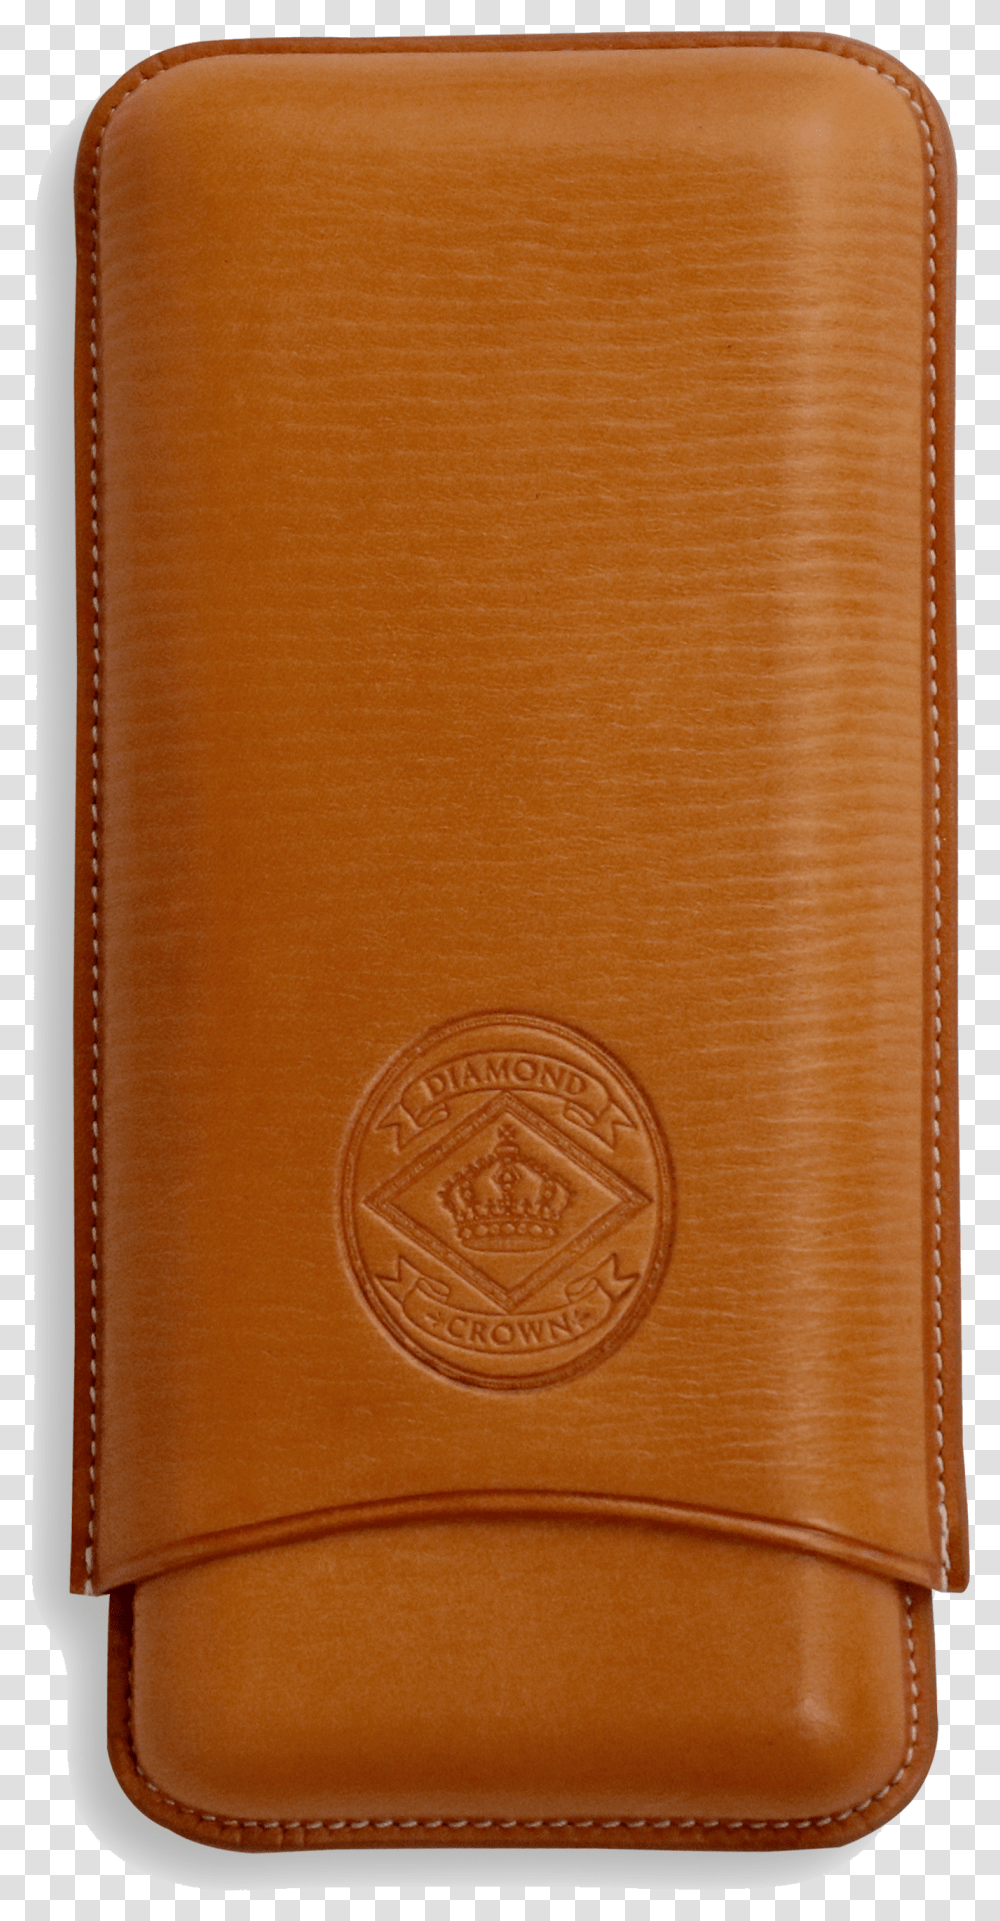 Diamond Crown Churchull Tan Leather Cigar Case Leather Transparent Png